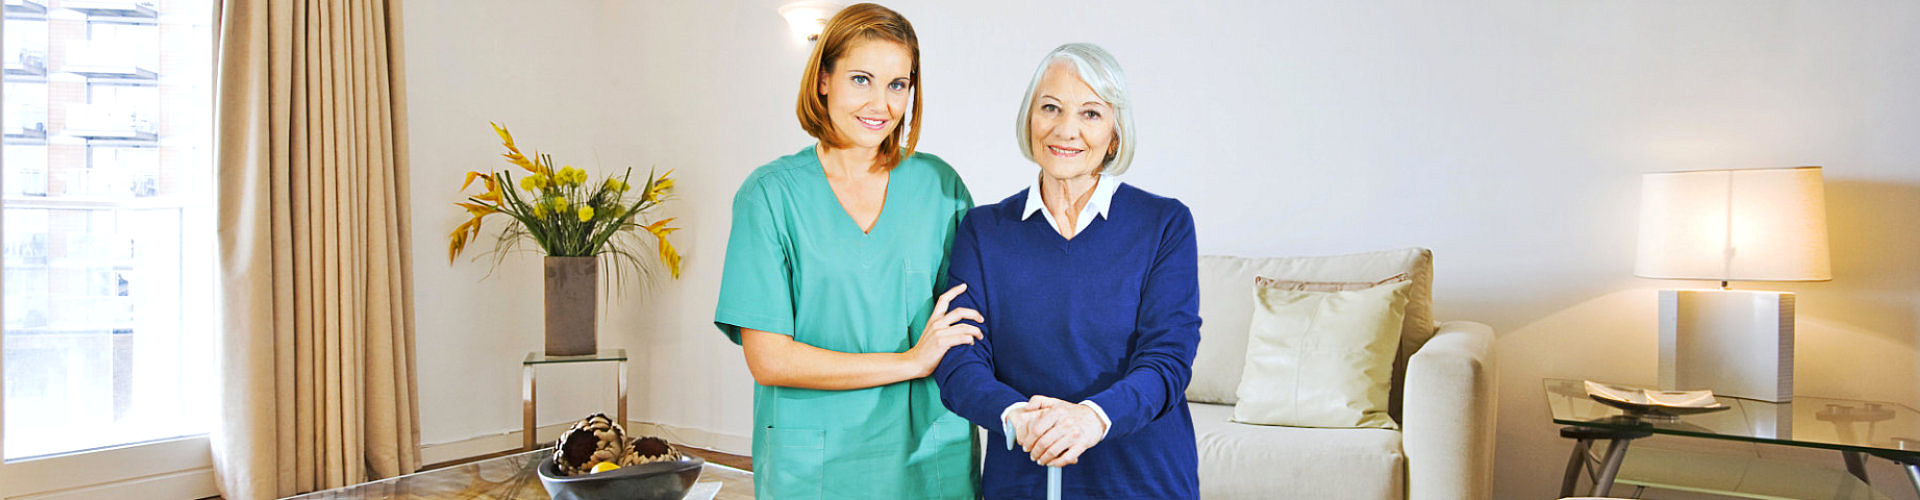 caregiver smiling with elderly woman